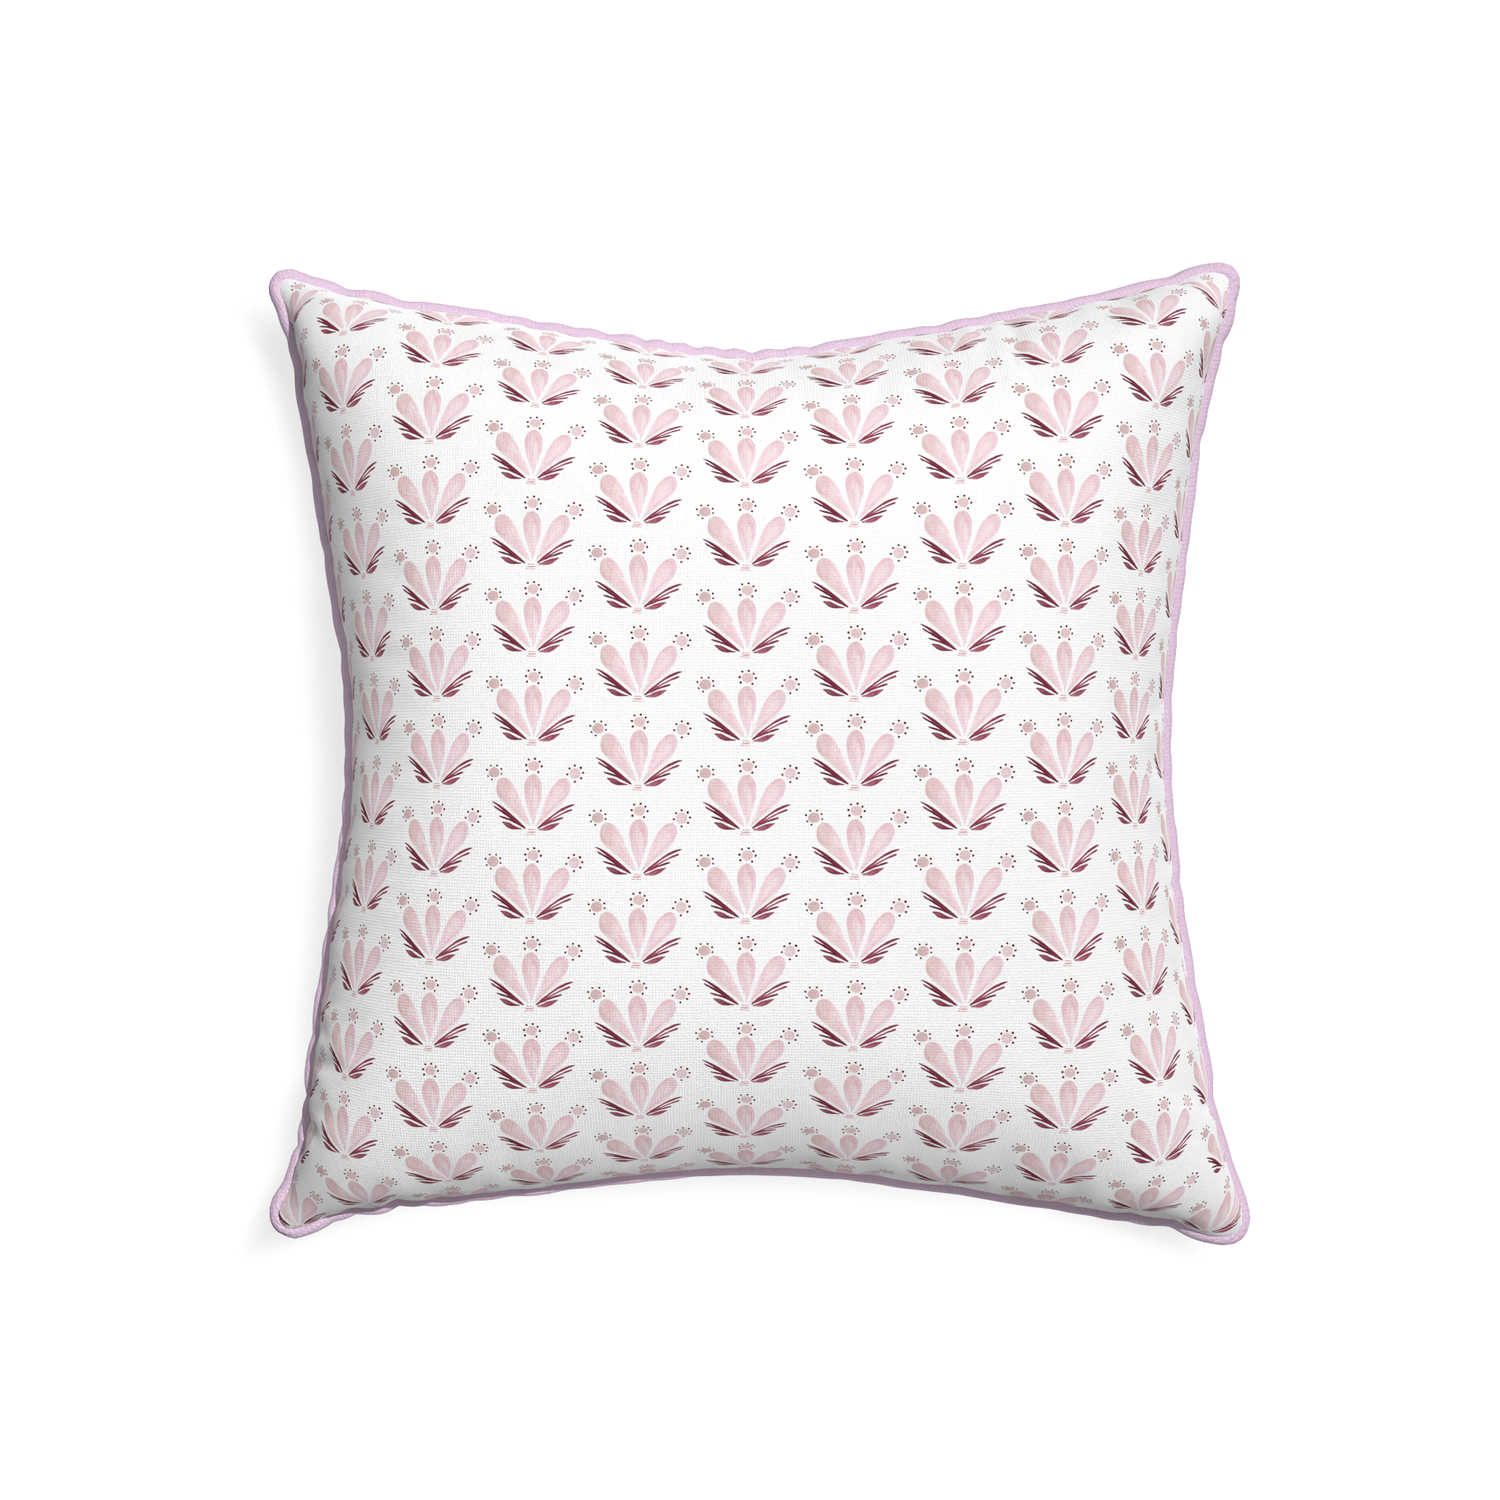 22-square serena pink custom pink & burgundy drop repeat floralpillow with l piping on white background